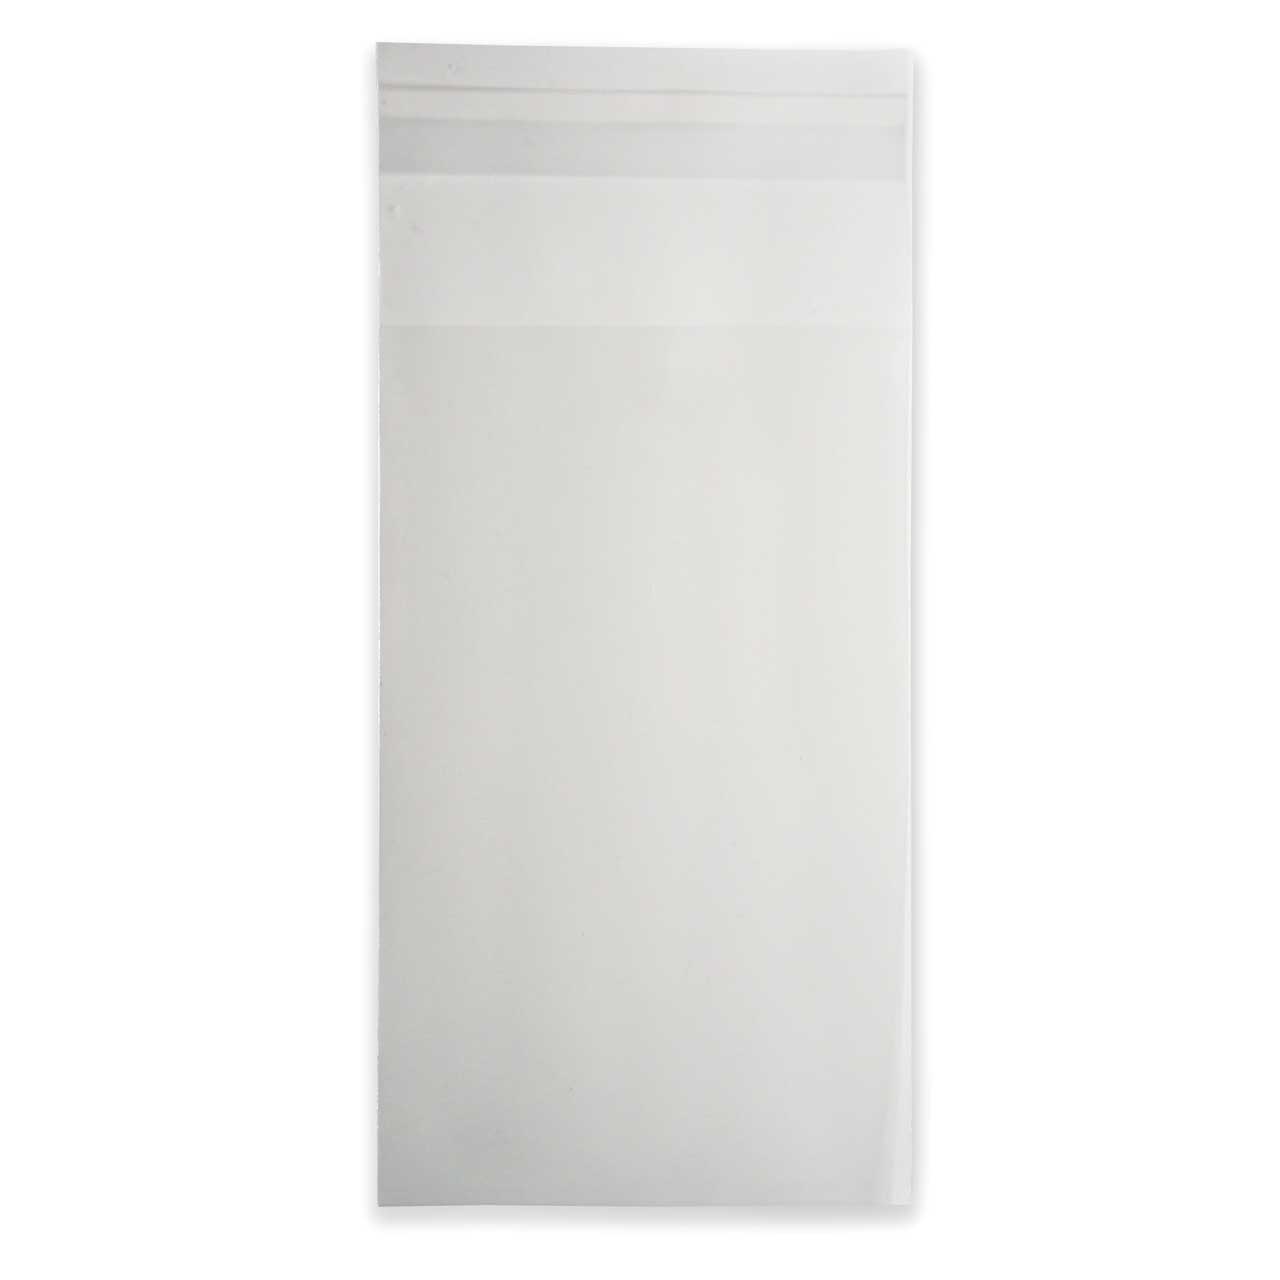 200X Clear Bags Reclosable Zipper Lock Plastic 2Mil Poly Jewelry 2